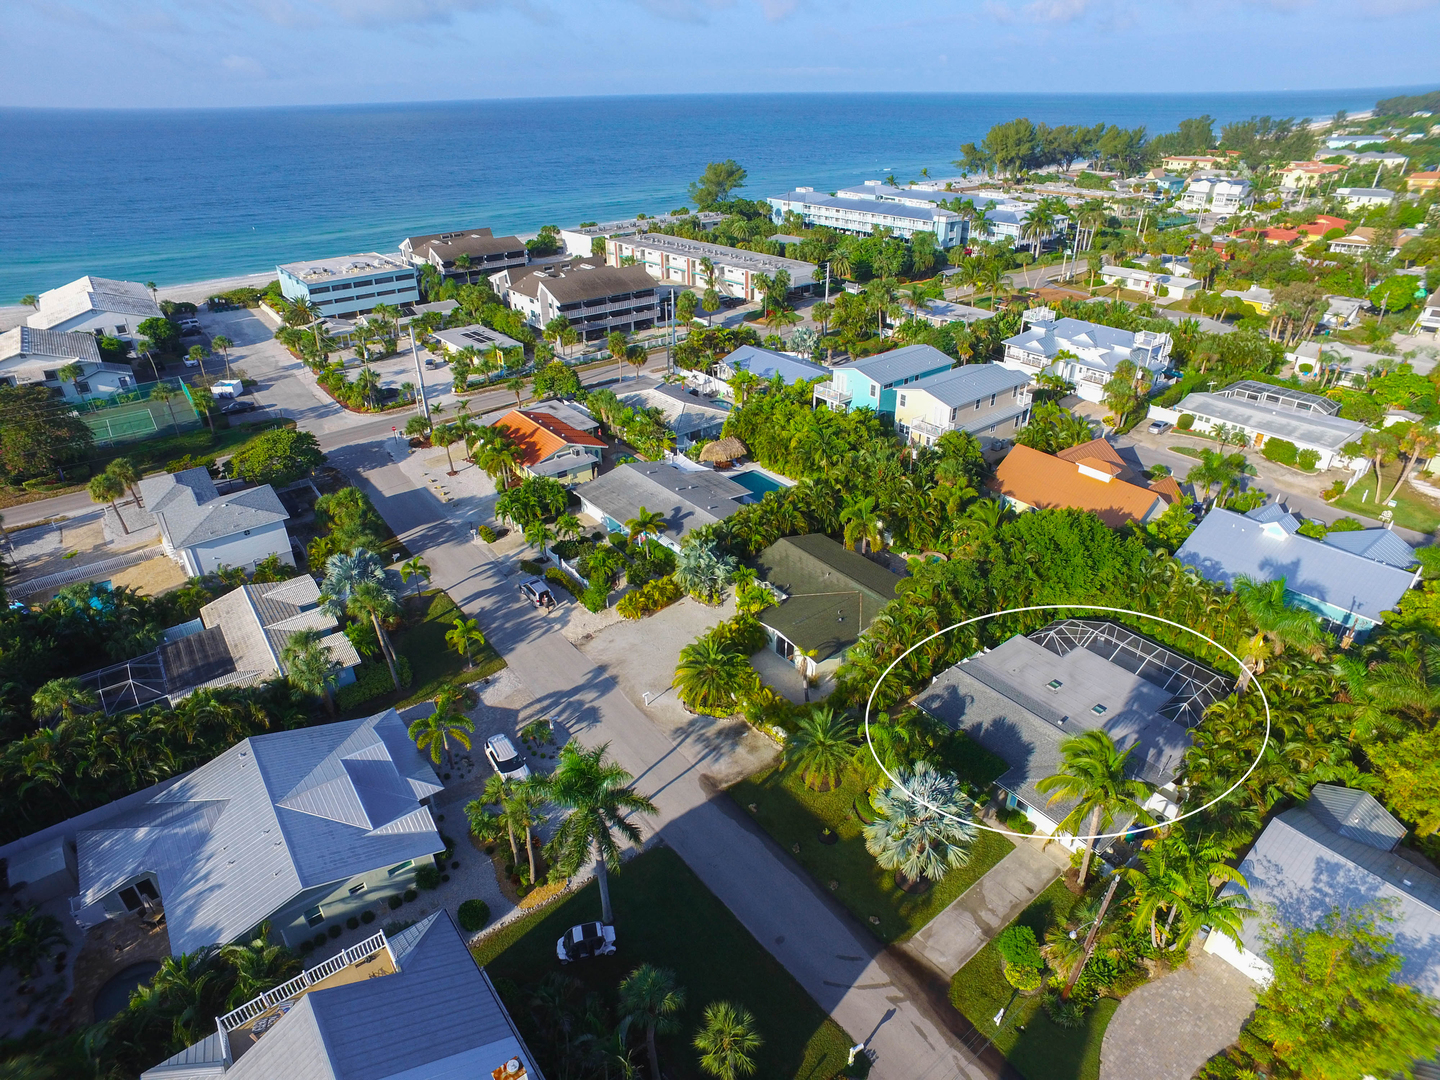 Arial view of Rest Assured by Anna Maria Life Vacation Rentals